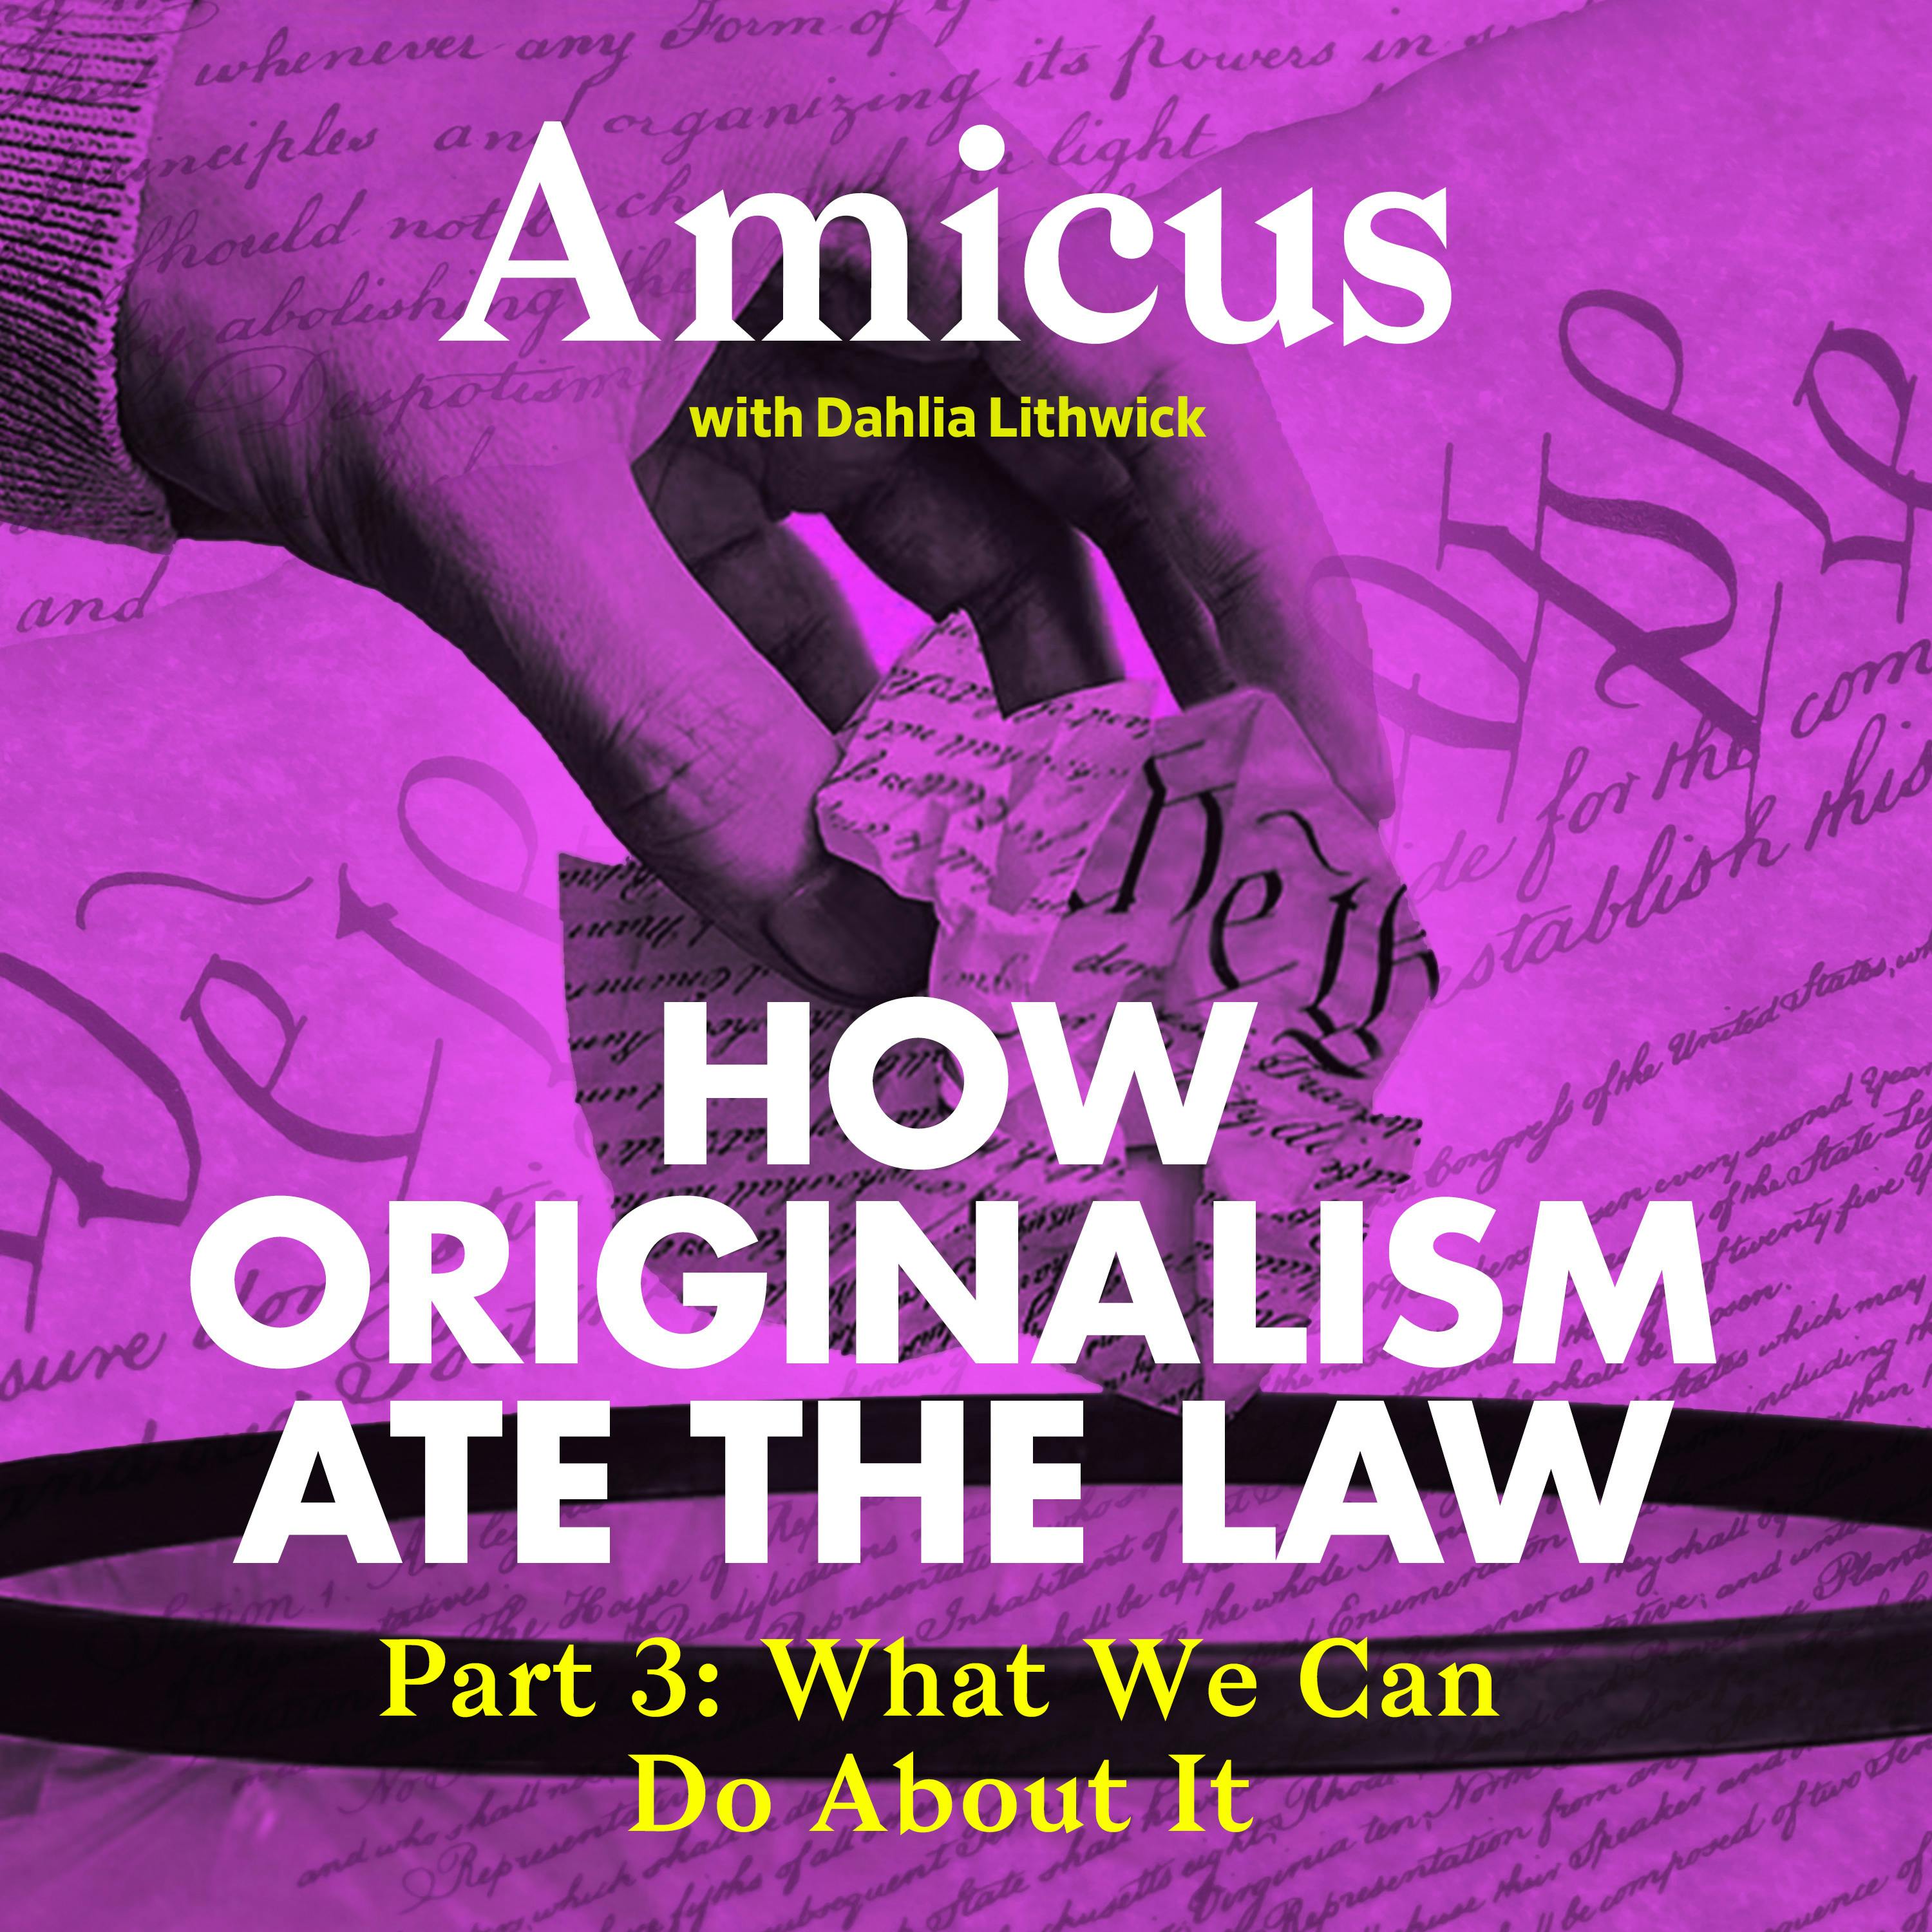 How Originalism Ate The Law: What We Can Do About It